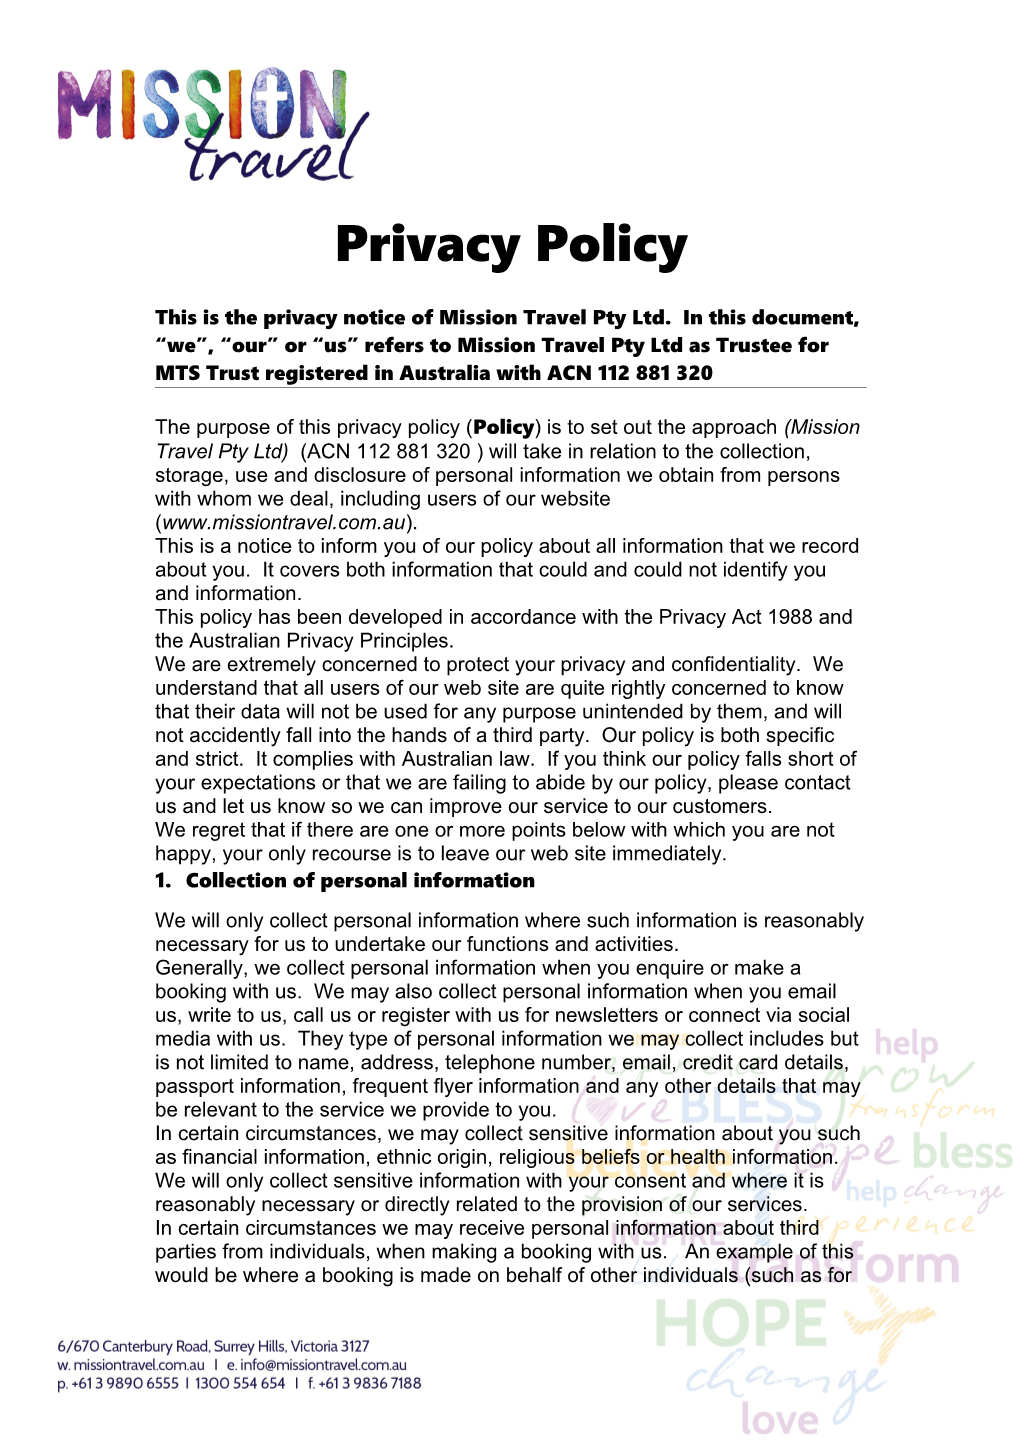 This Is the Privacy Notice of Mission Travel Pty Ltd. in This Document, We , Our Or Us